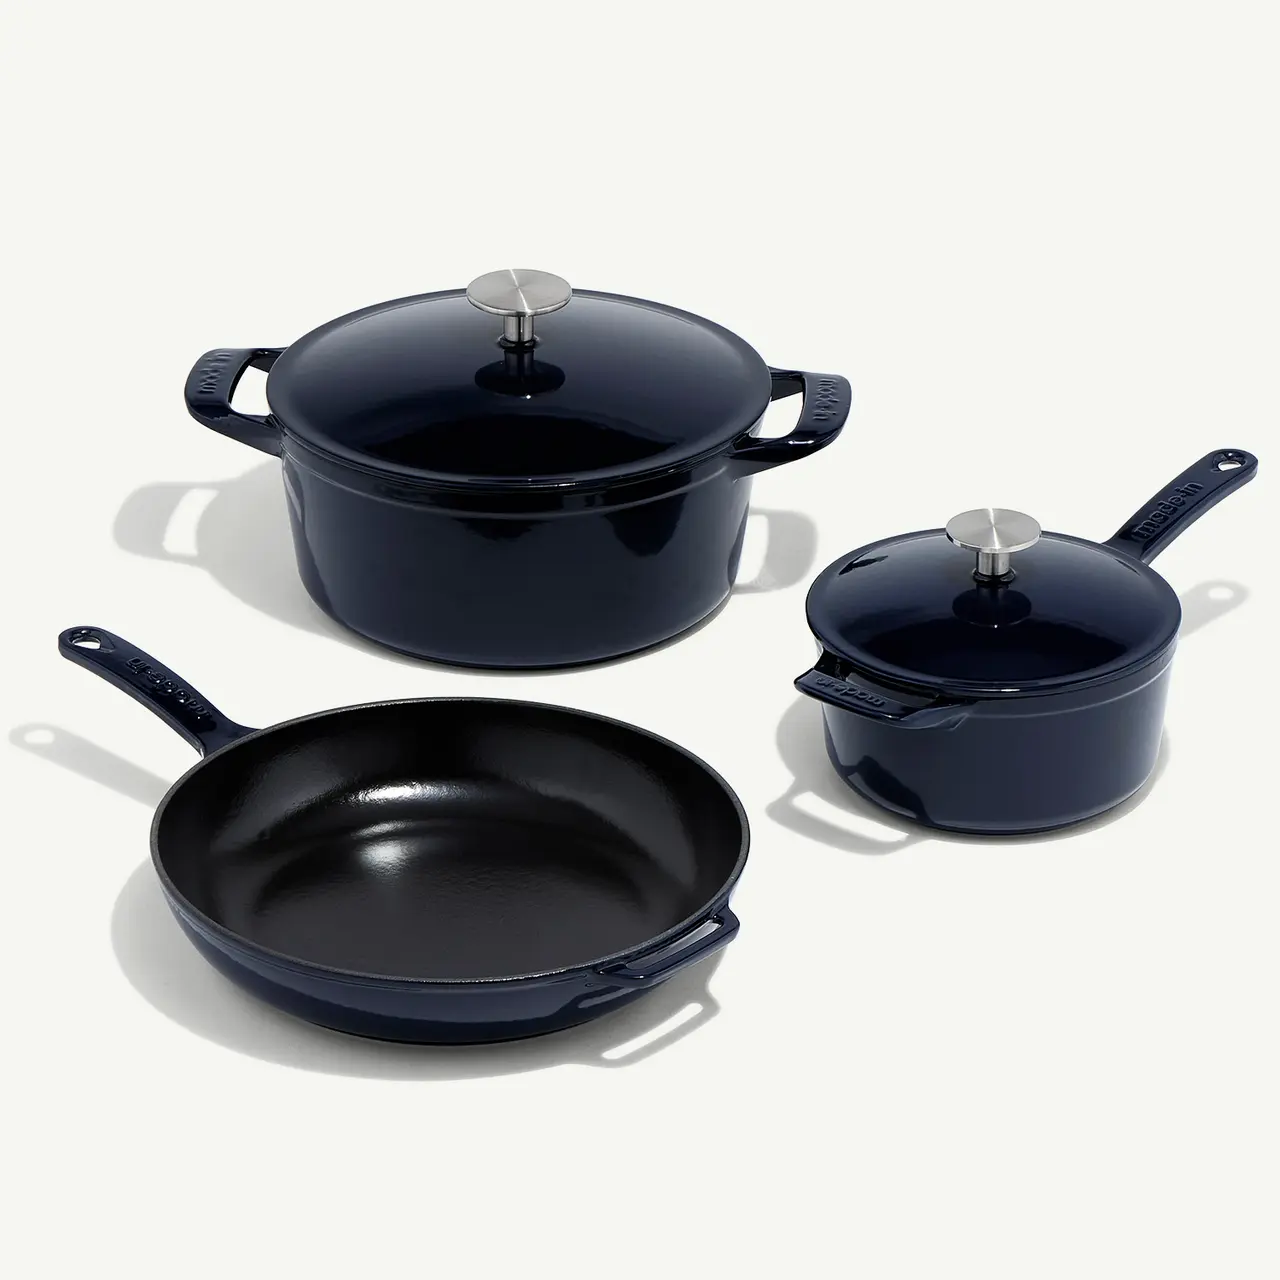 A set of navy blue cookware, including a skillet, a pot, and a saucepan with lids, is arranged on a light surface.